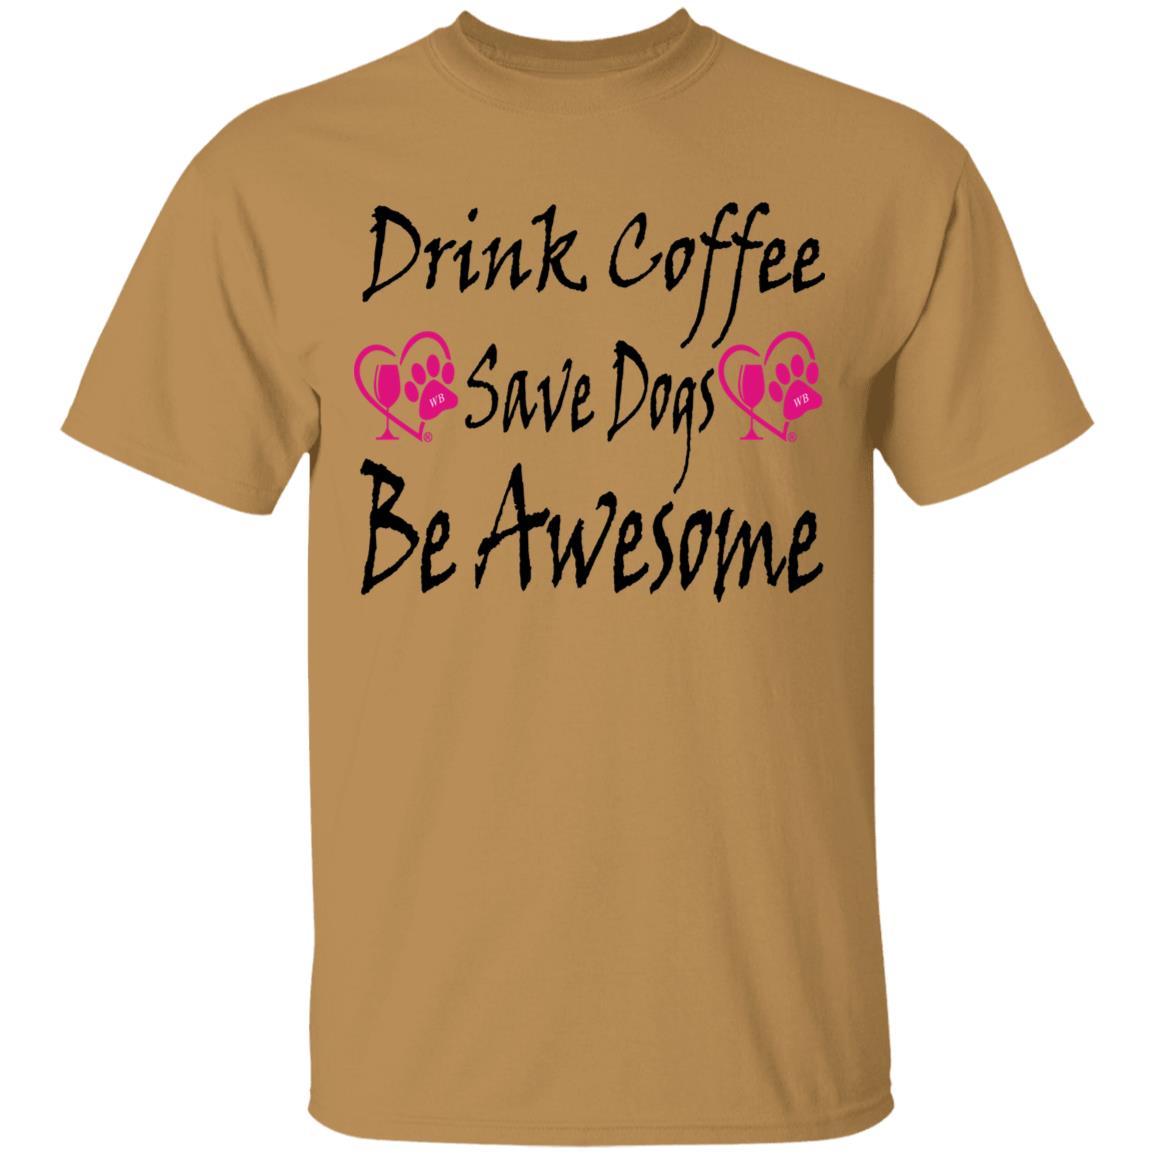 T-Shirts Old Gold / S Winey Bitches Co "Drink Coffee Save Dogs Be Awesome" 5.3 oz. T-Shirt WineyBitchesCo